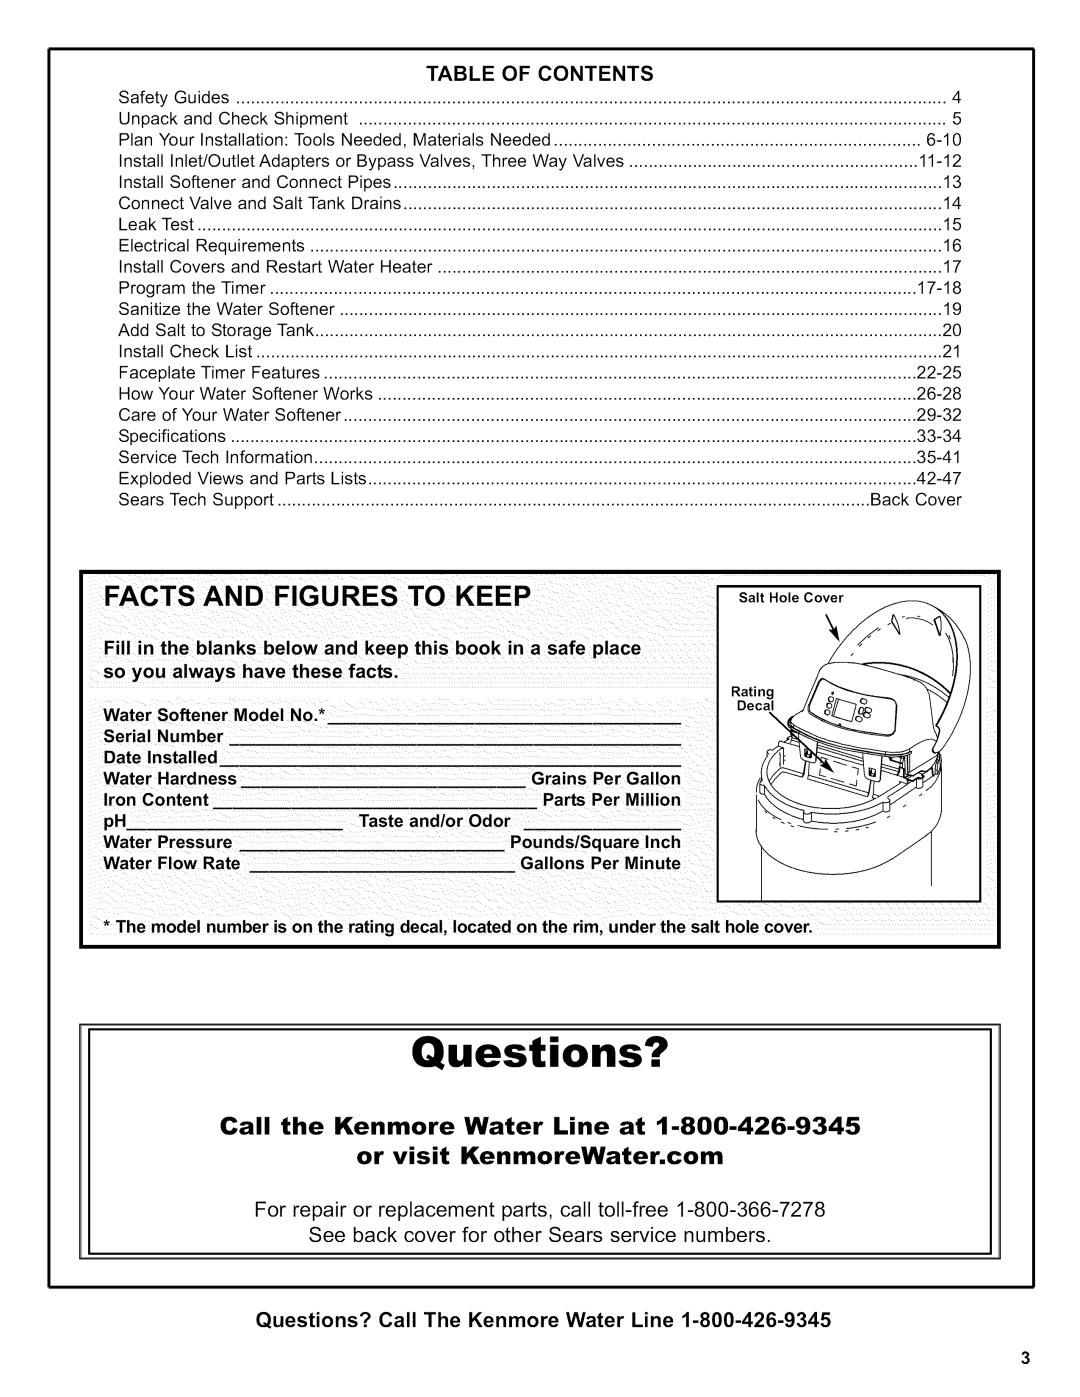 Kenmore 625.38376 Questions?, Call the Kenmore Water Line at or visit KenmoreWater.com, Of Contents, Softener Model 